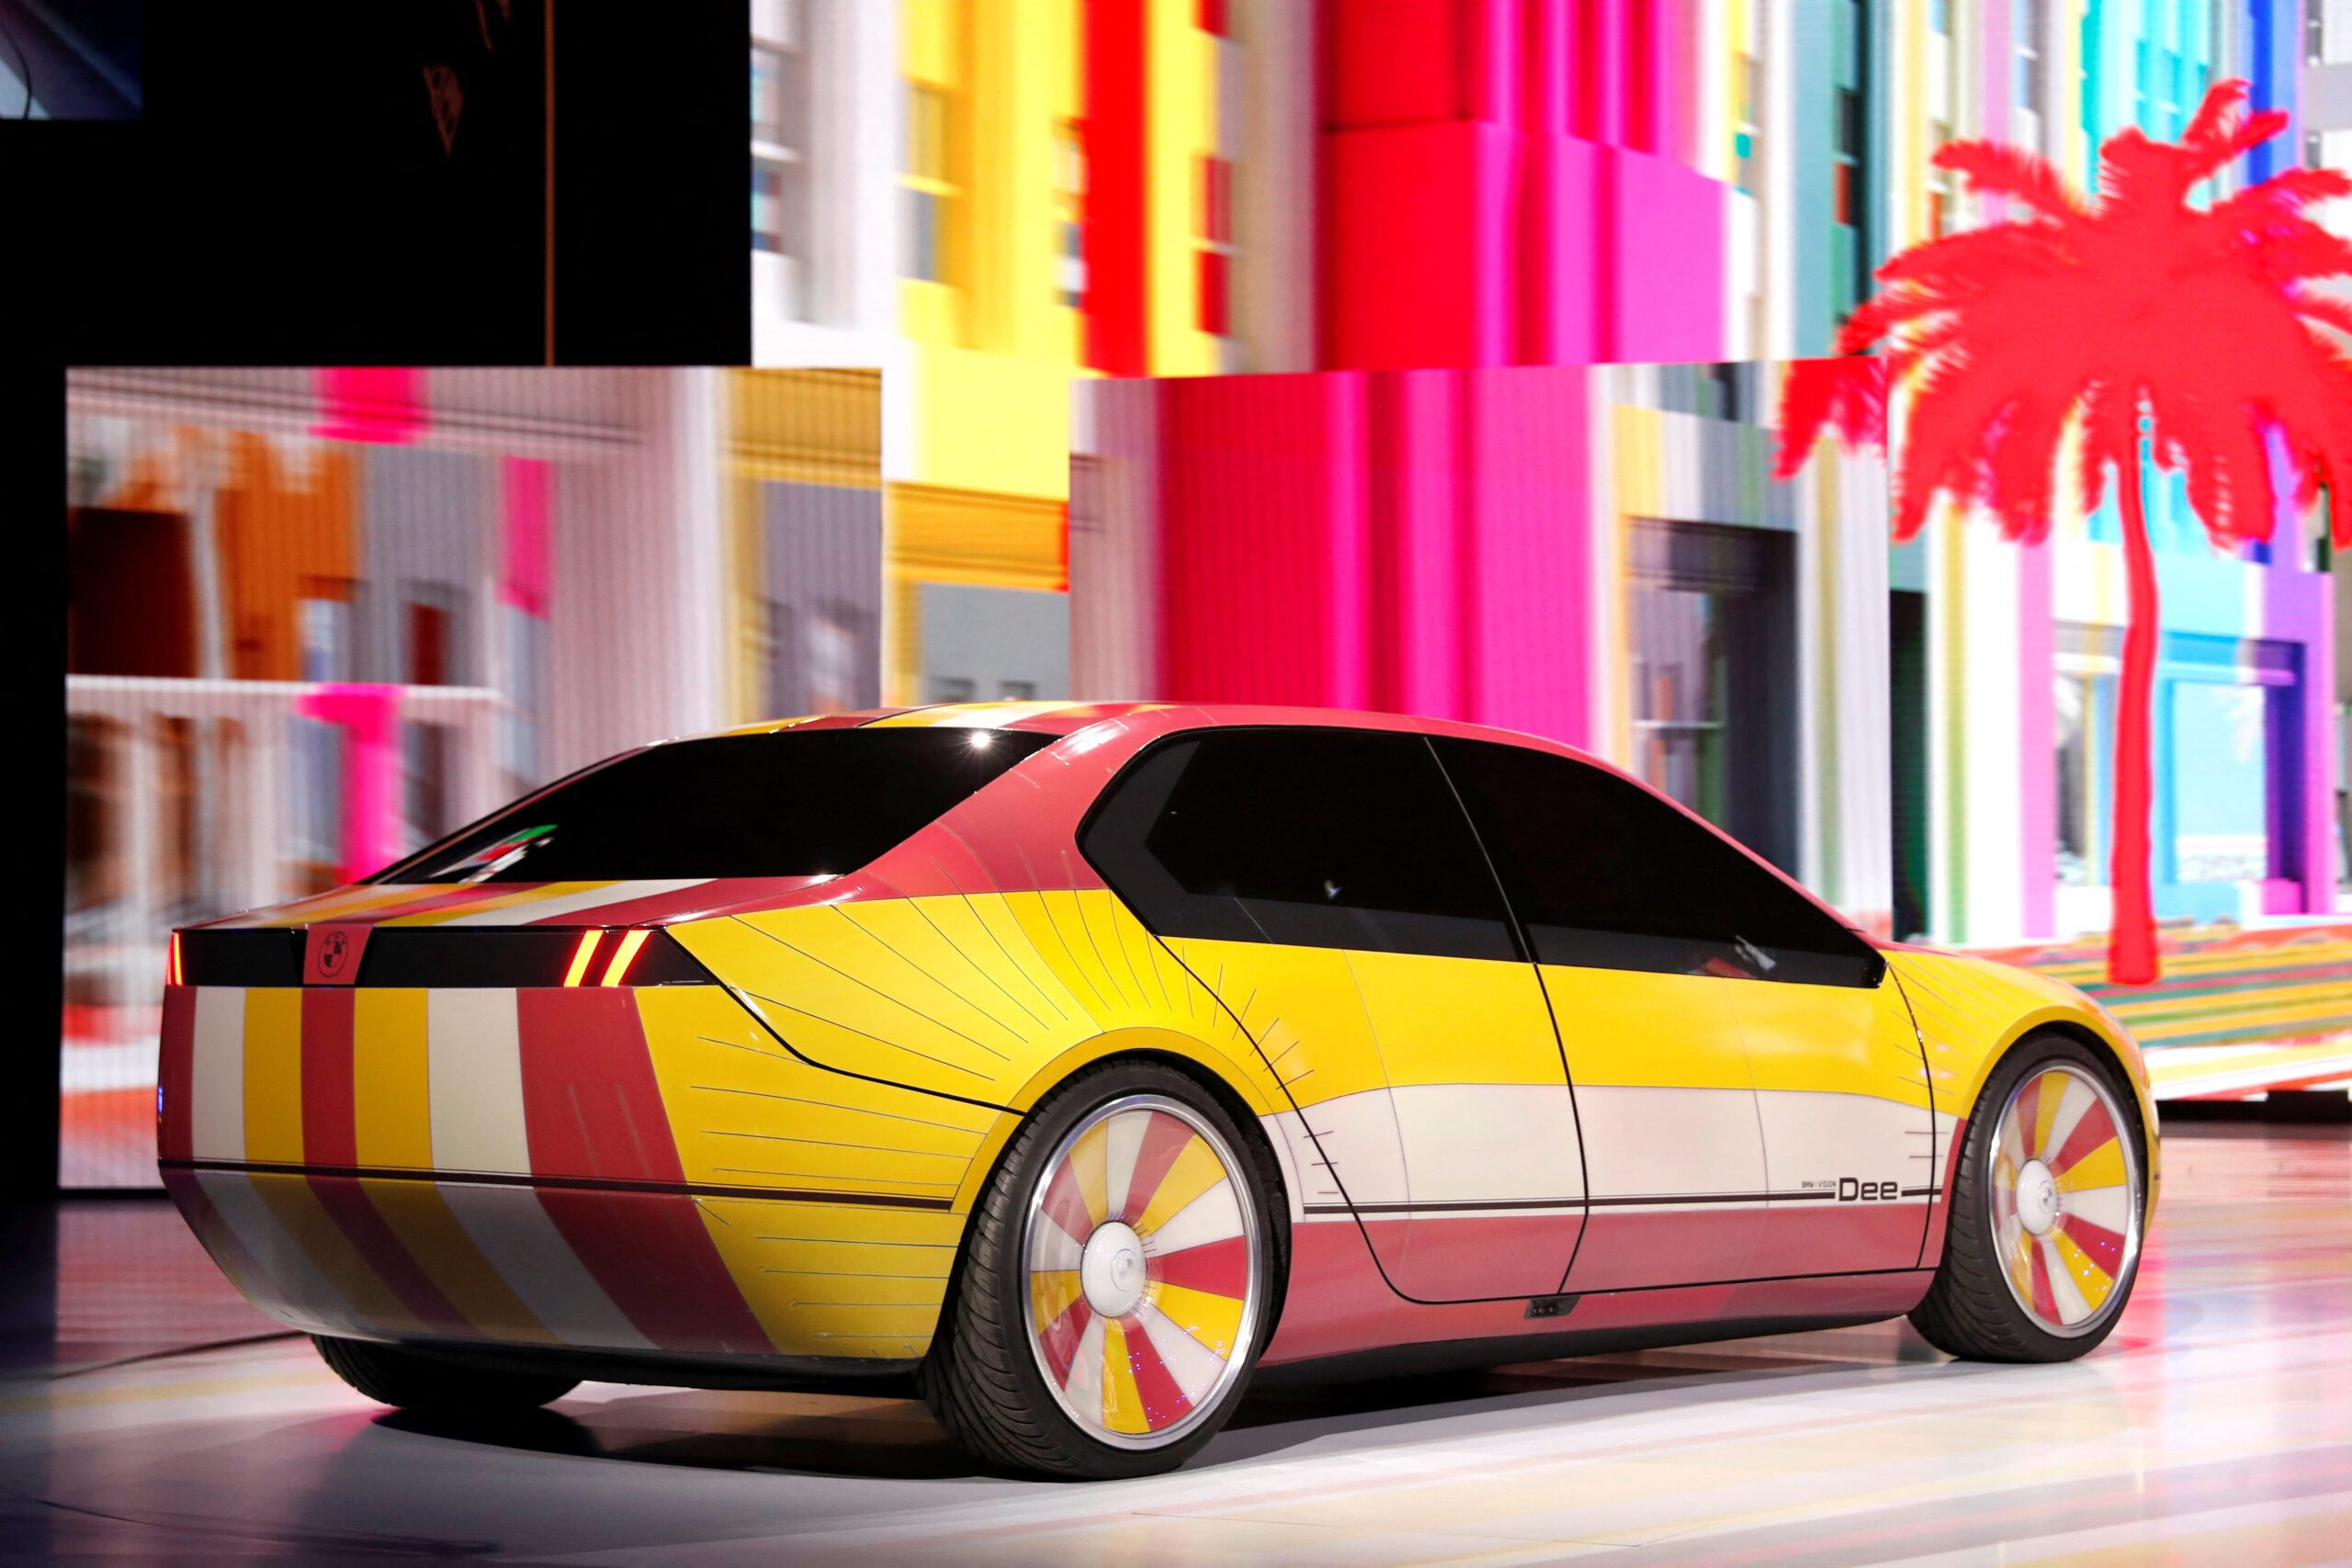 BMW teases a talking car that shifts colors like a chameleon